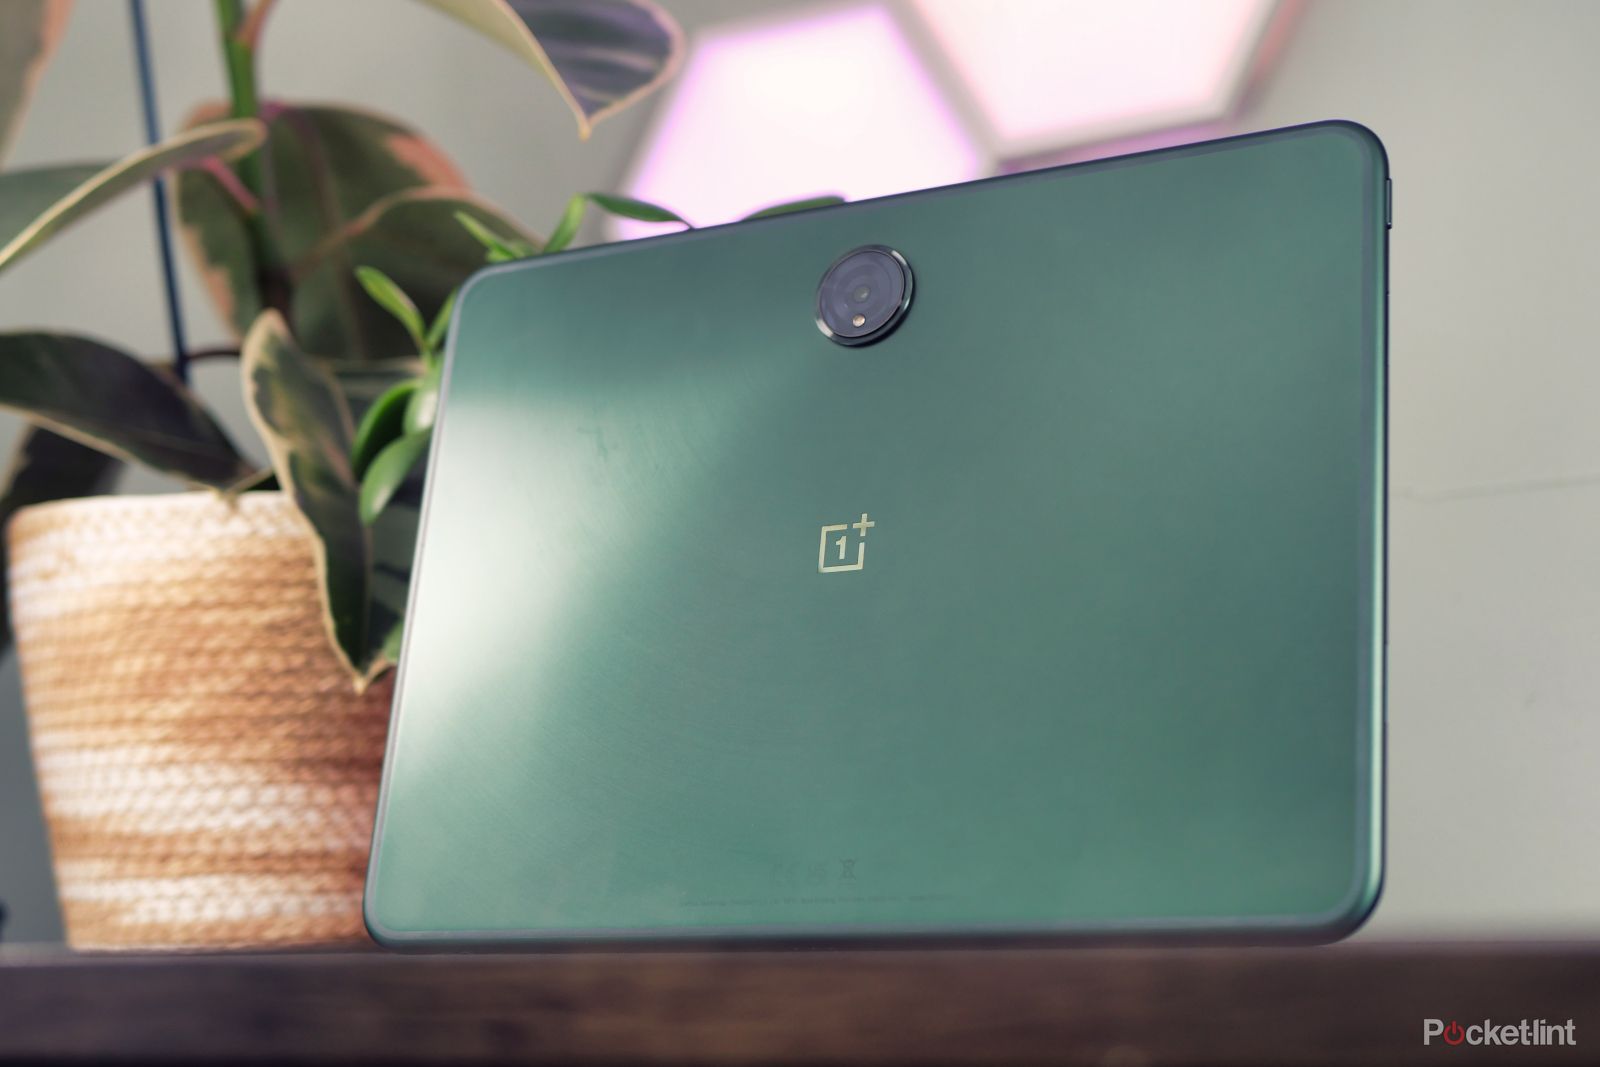 OnePlus Pad arrives with big battery, 144Hz display, and MediaTek power